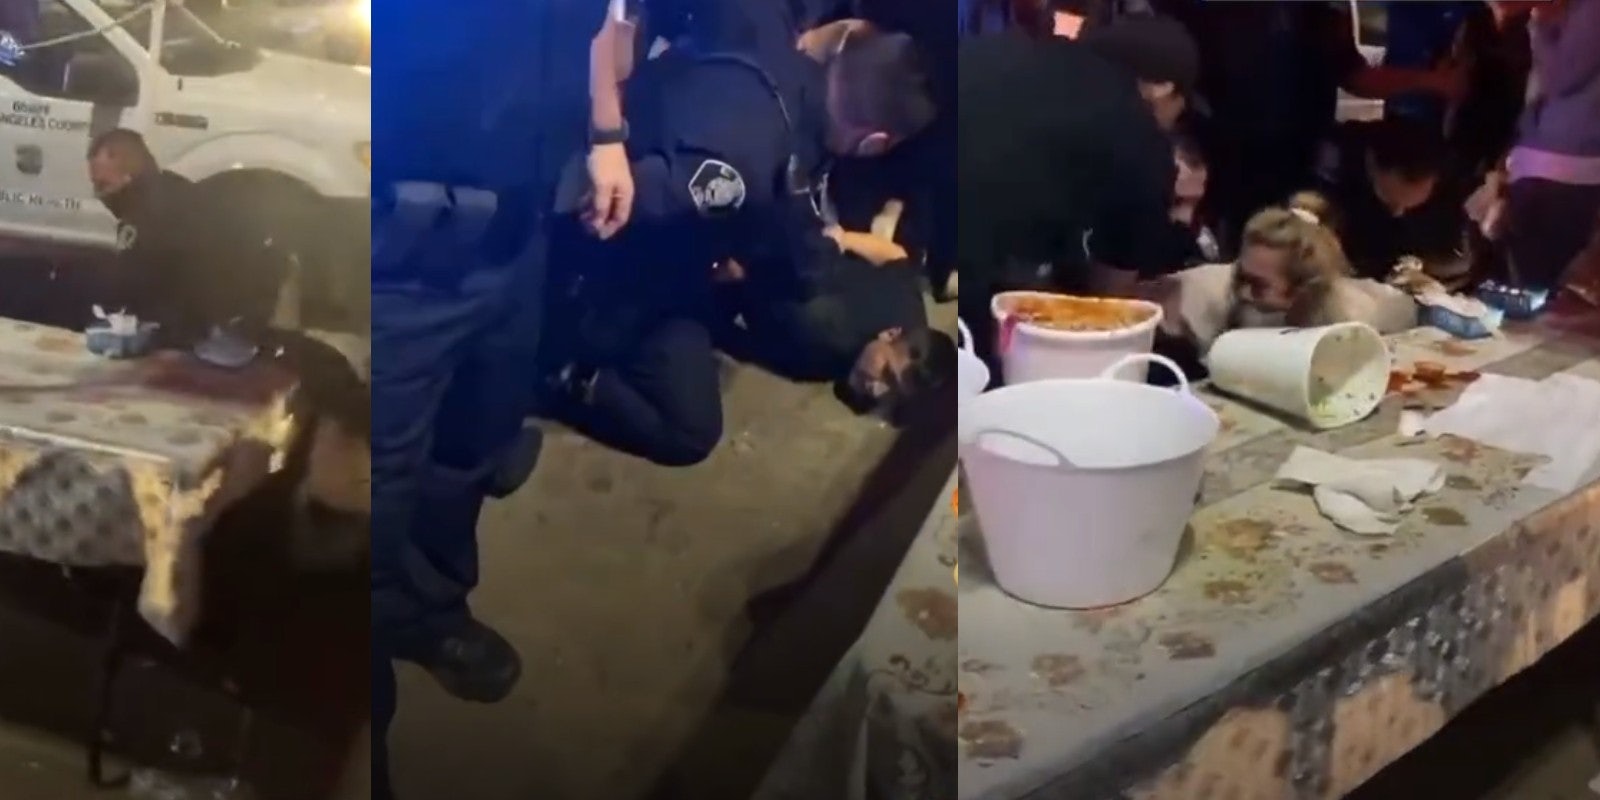 Video shows police beating a Hispanic couple outside a street food stall